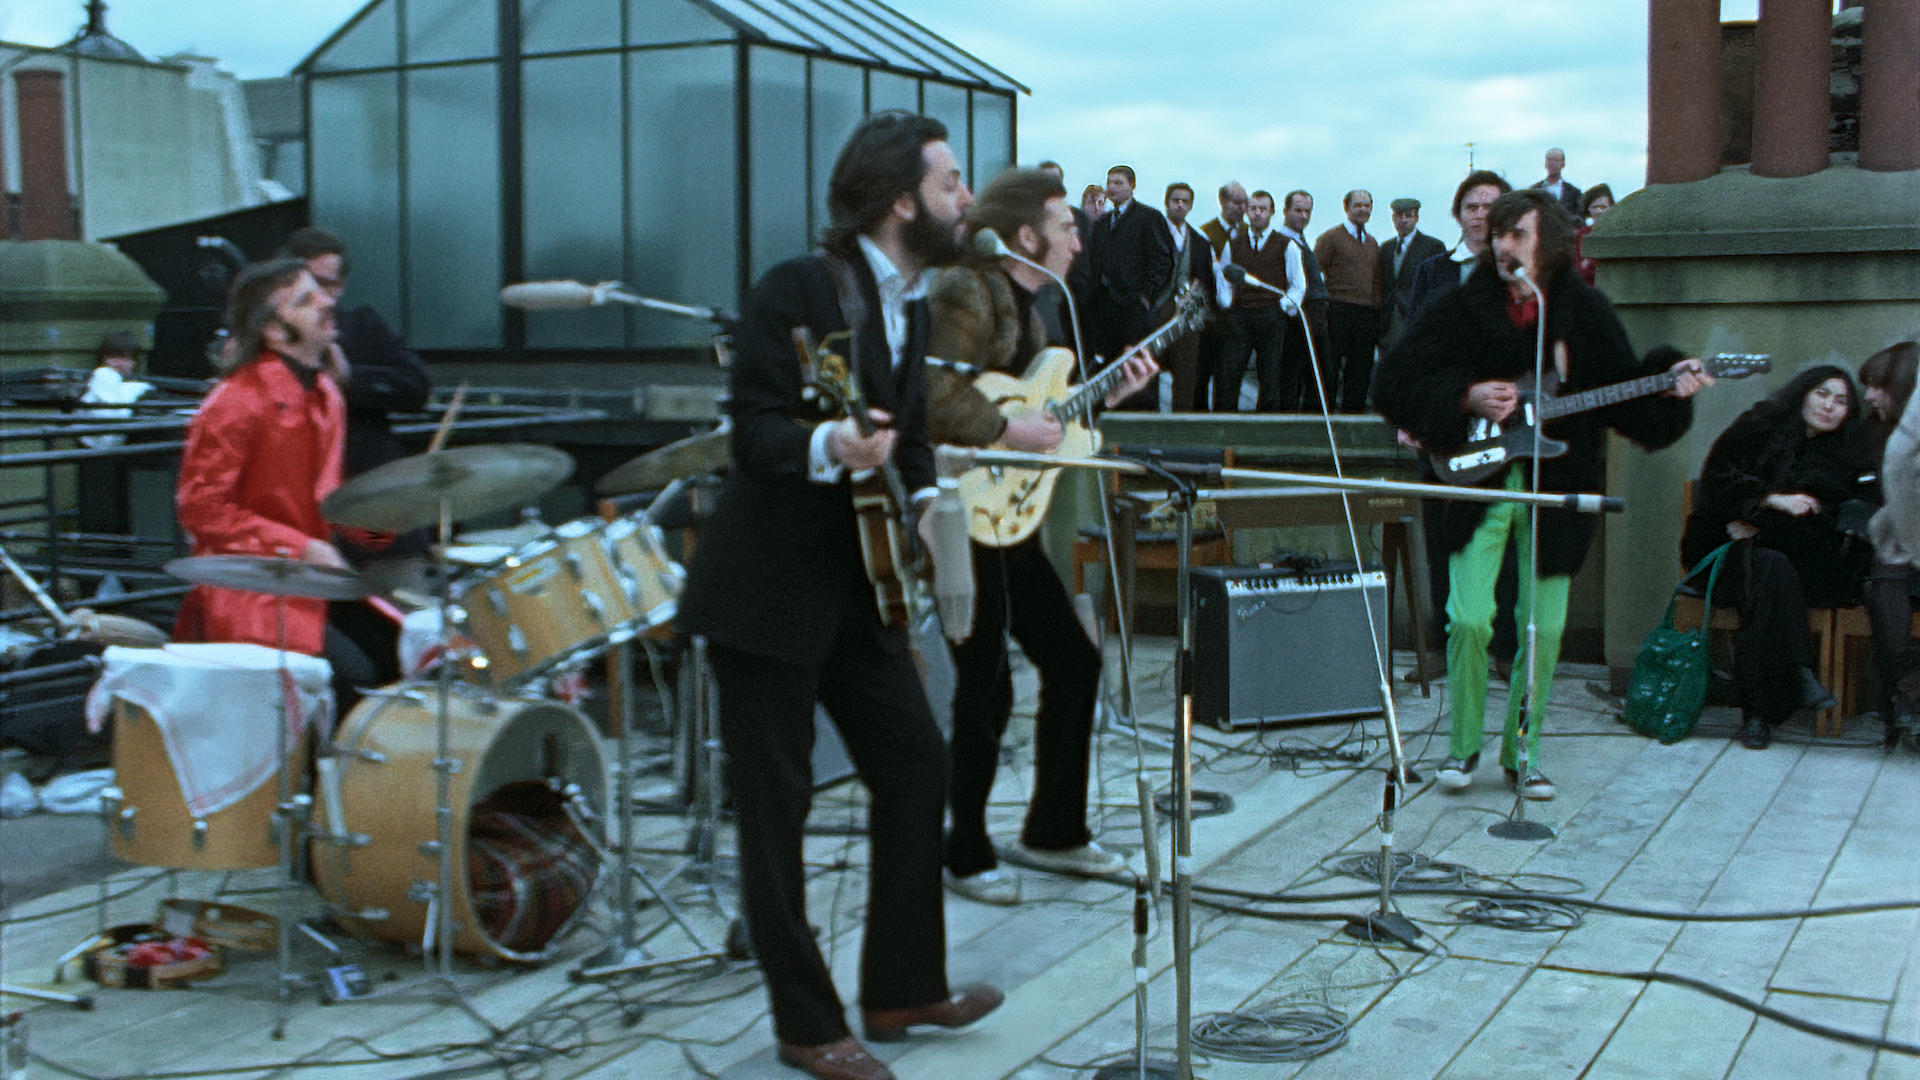 Ringo Starr, Paul McCartney, John Lennon, and George Harrison playing their famous gig on a London rooftop